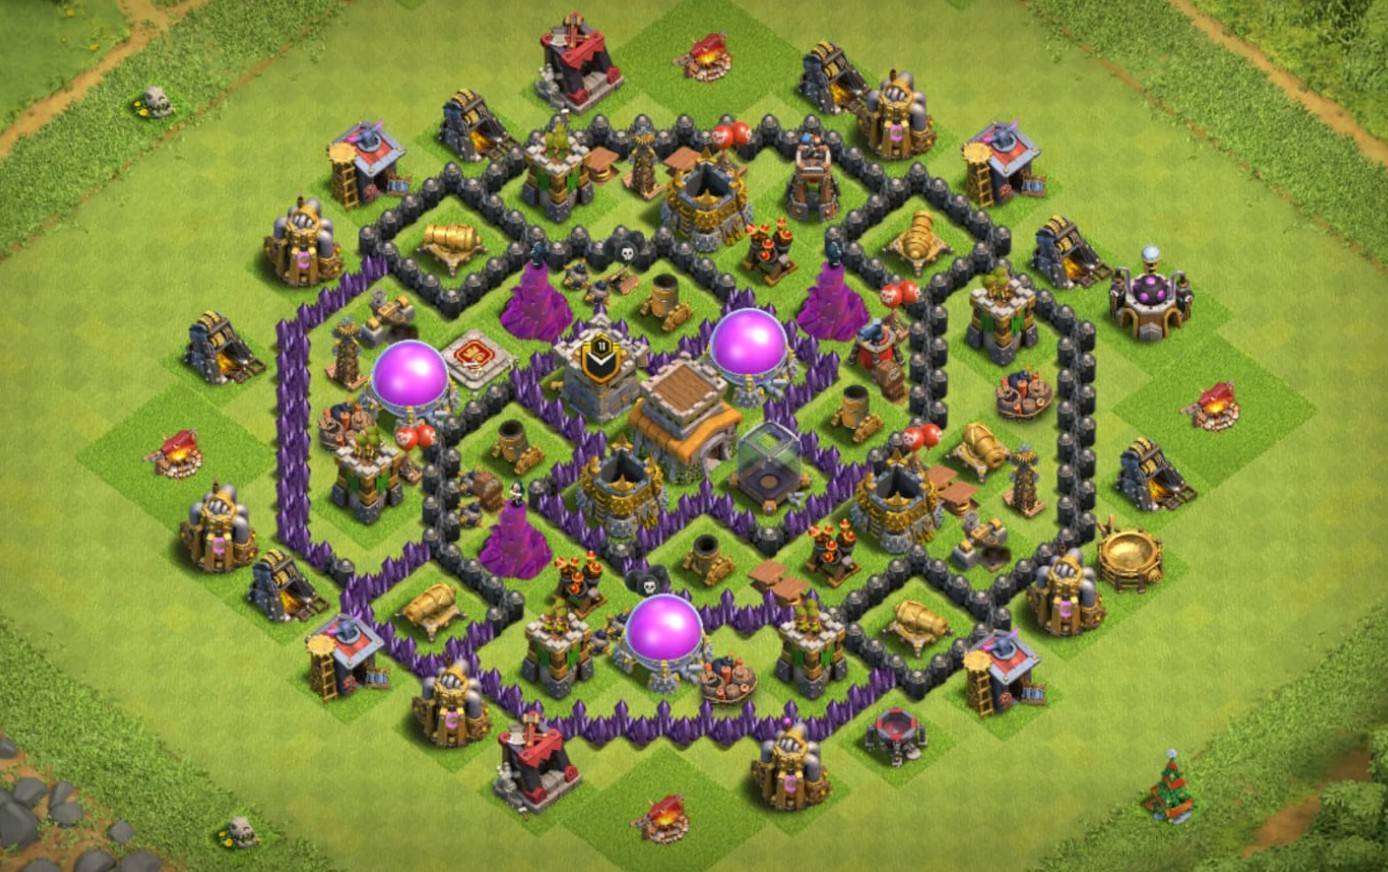 th8 farming base layout with copy link